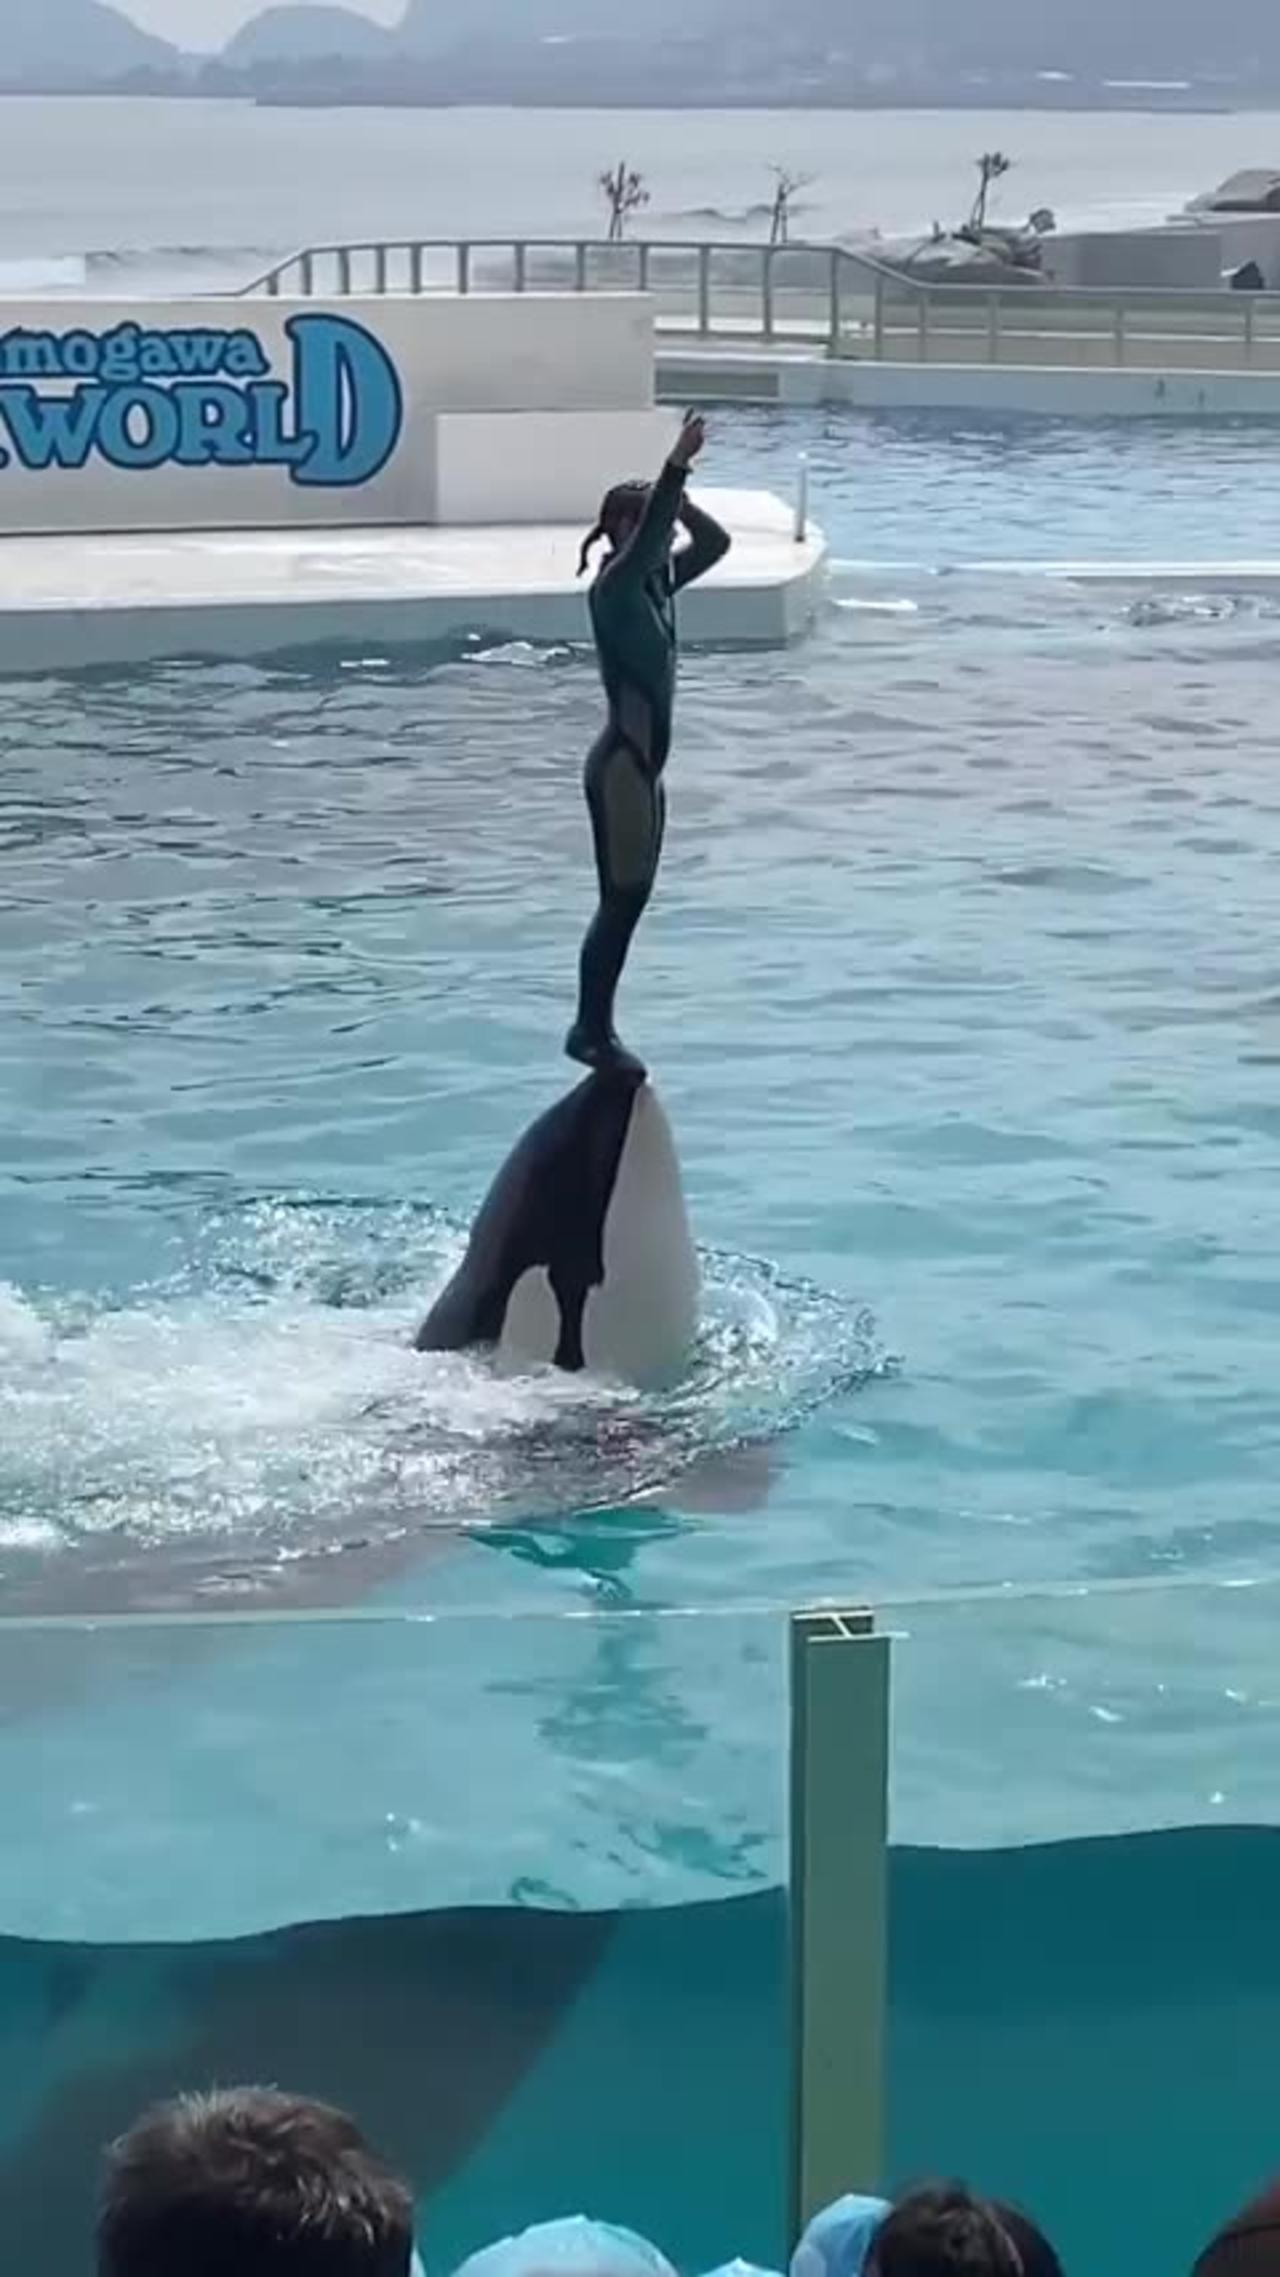 Wonderful performance by our dolphins at the seaworld